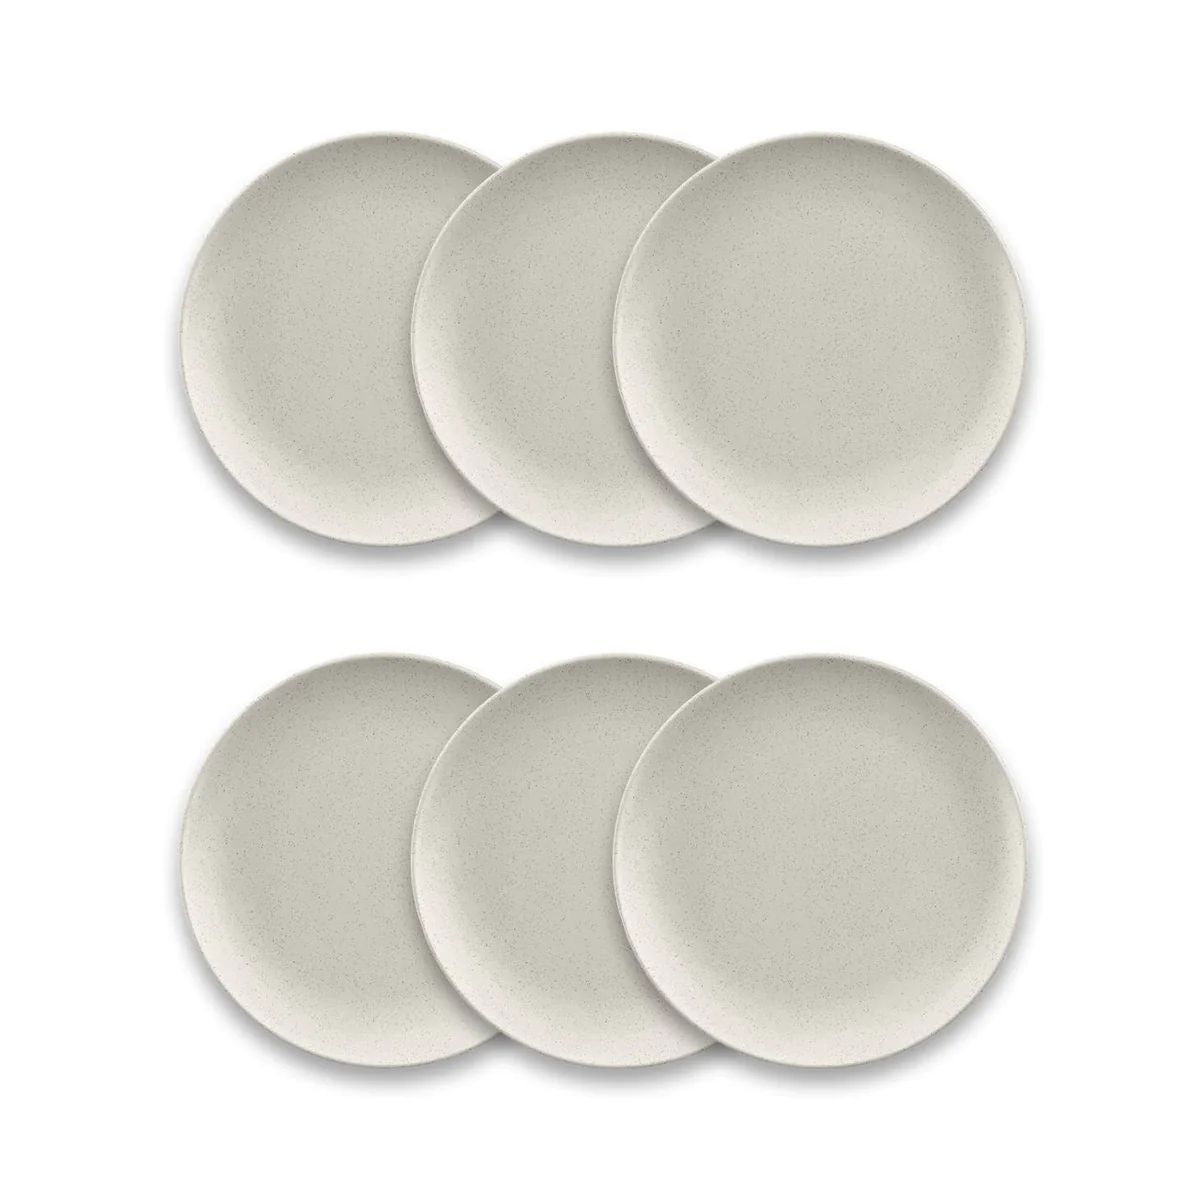 WHEAT STRAW SALAD PLATES - SET OF 6 | Cooper at Home